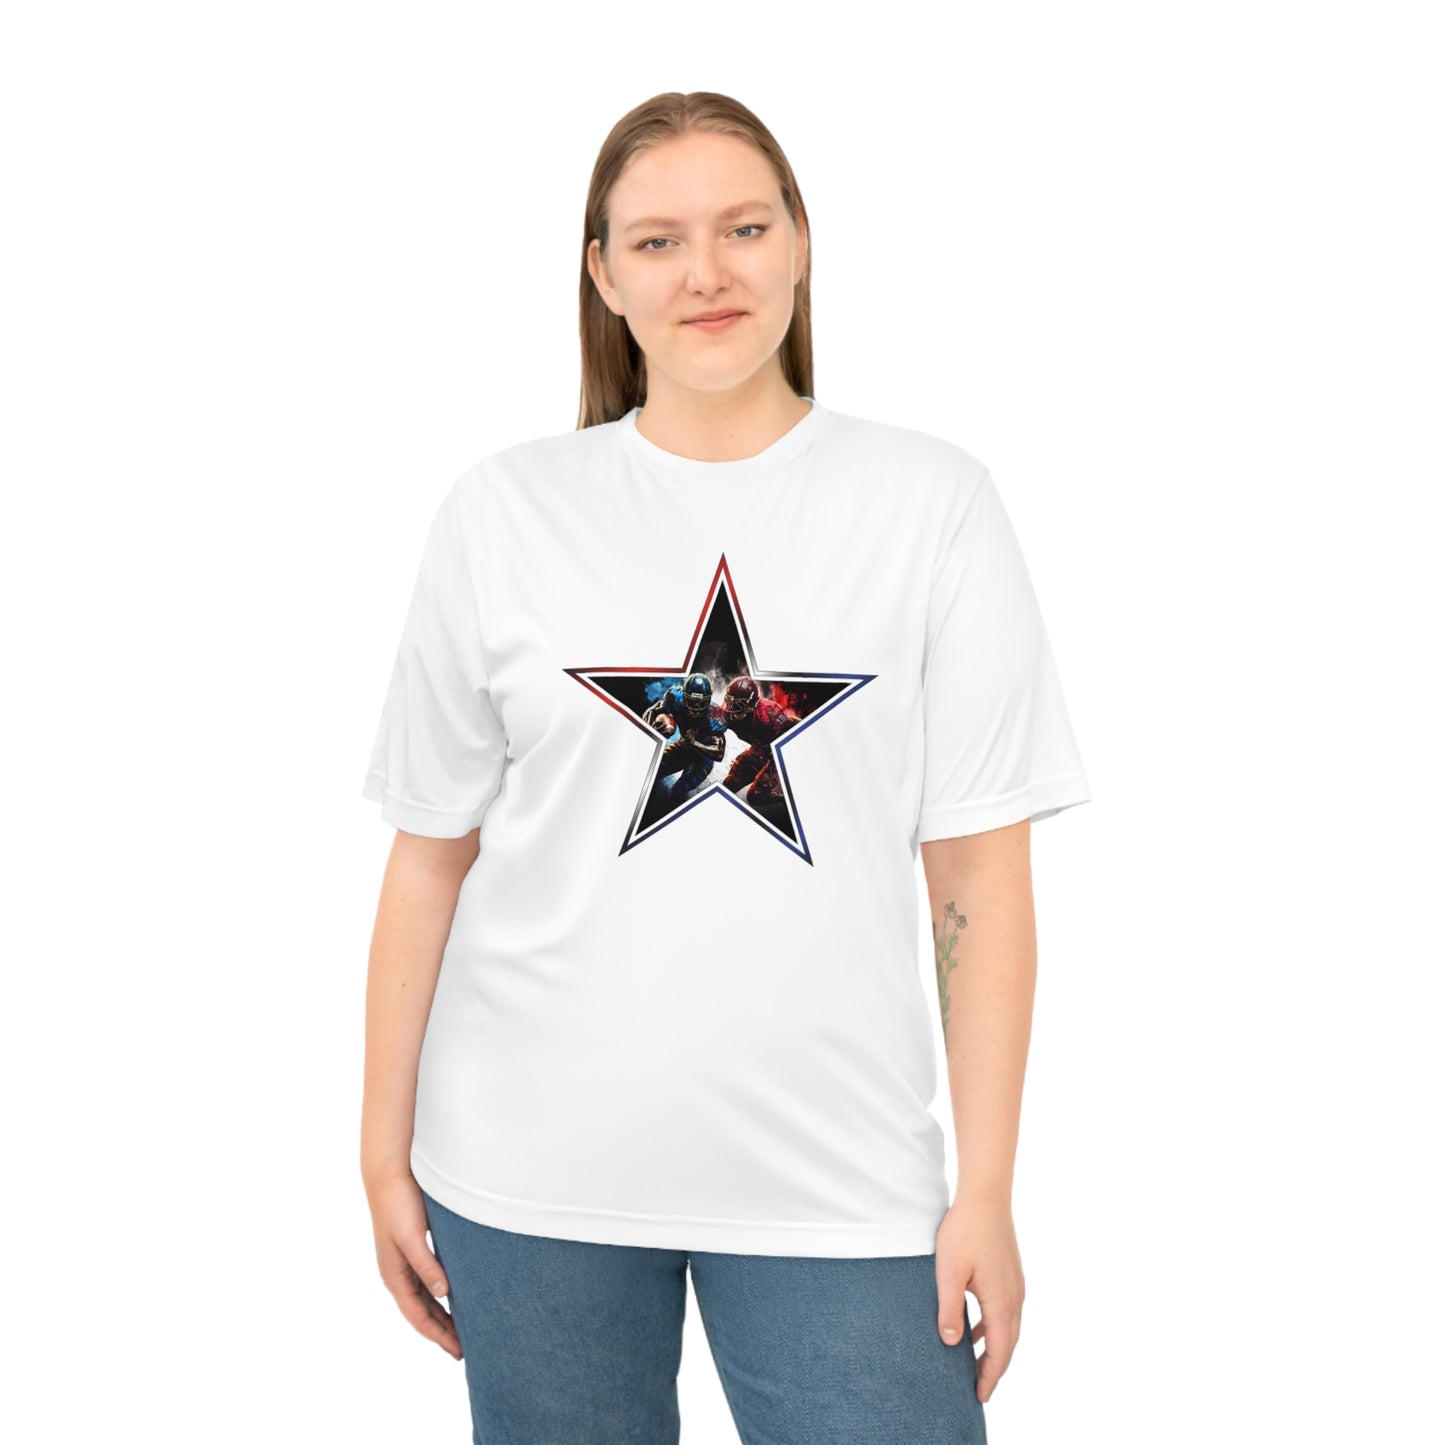 Texas Football - Watercolor Images - Jersey #13 #21 - Unisex Zone Performance T-shirt - Front Image Only